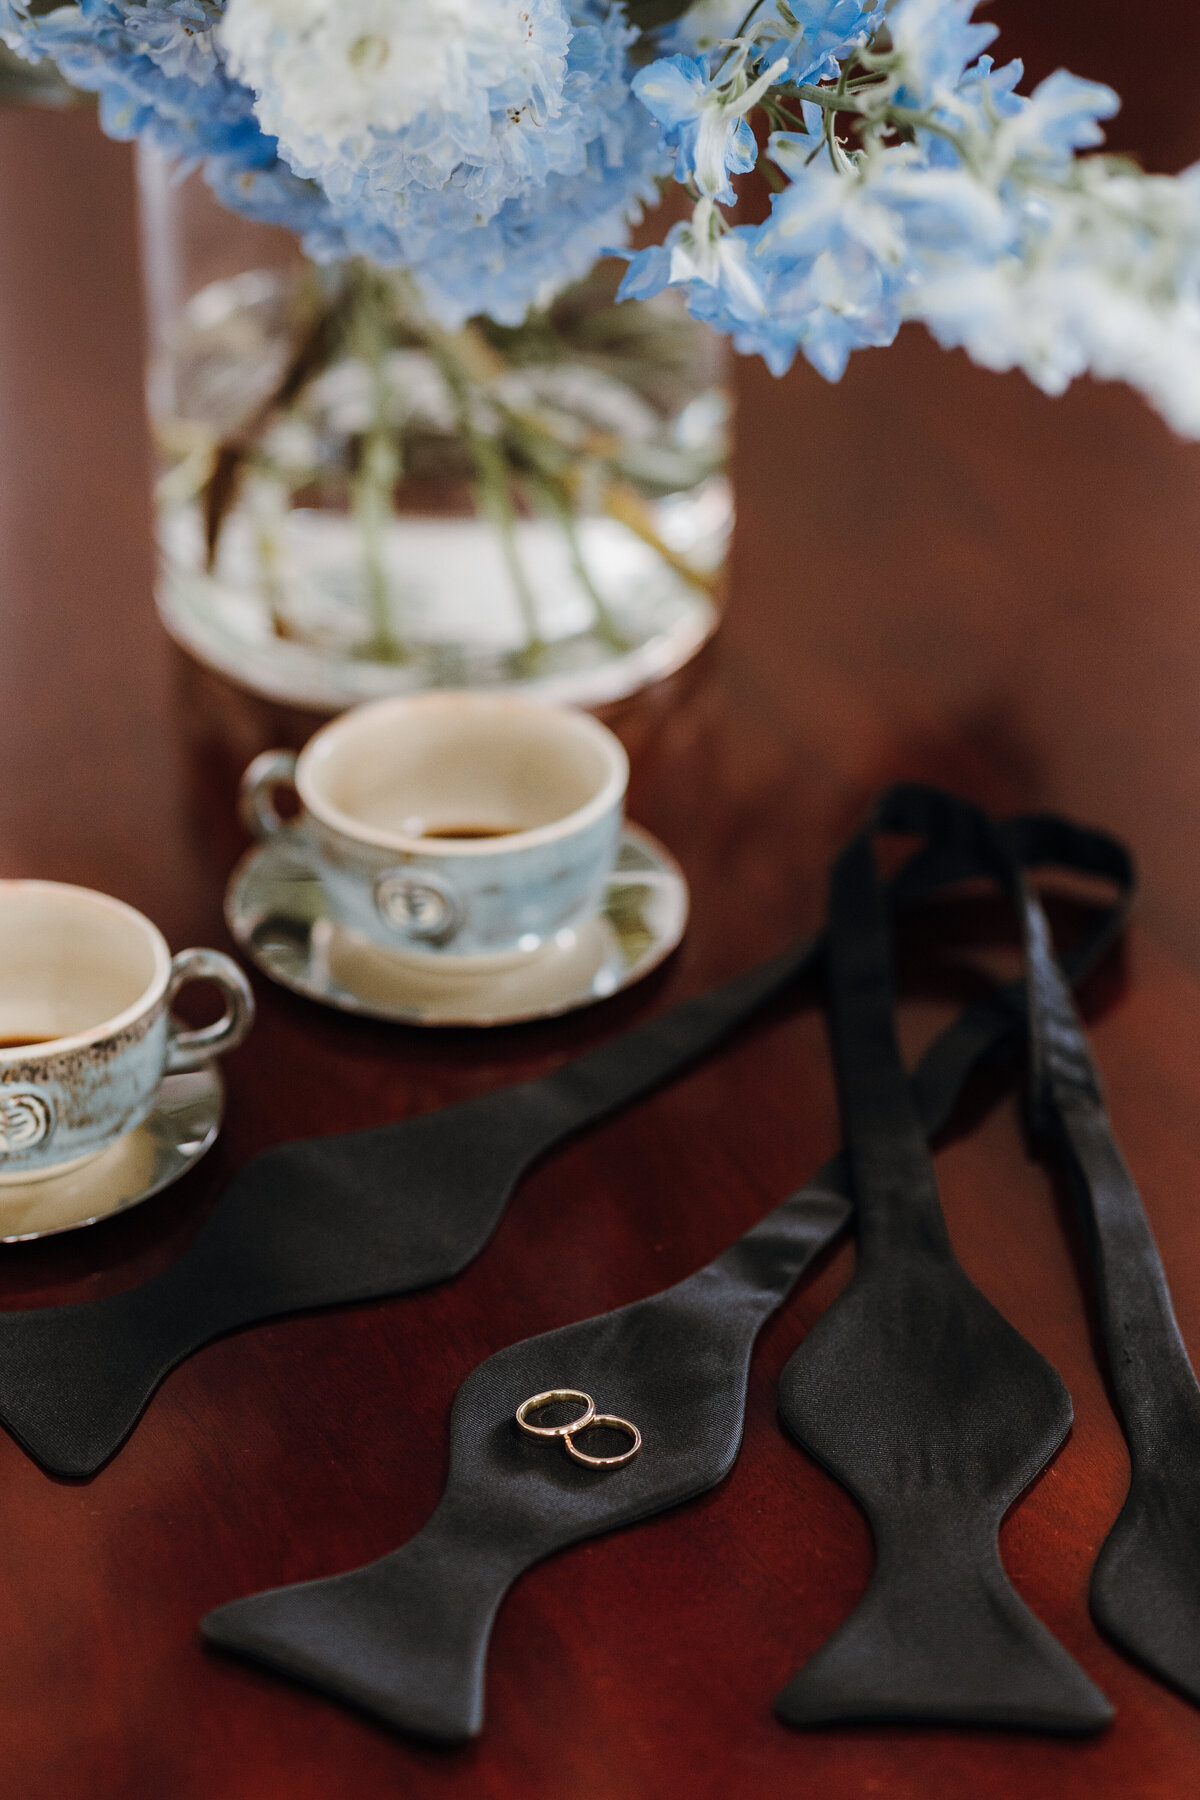 The grooms' bow ties, cups of coffee, and their gold wedding bands.